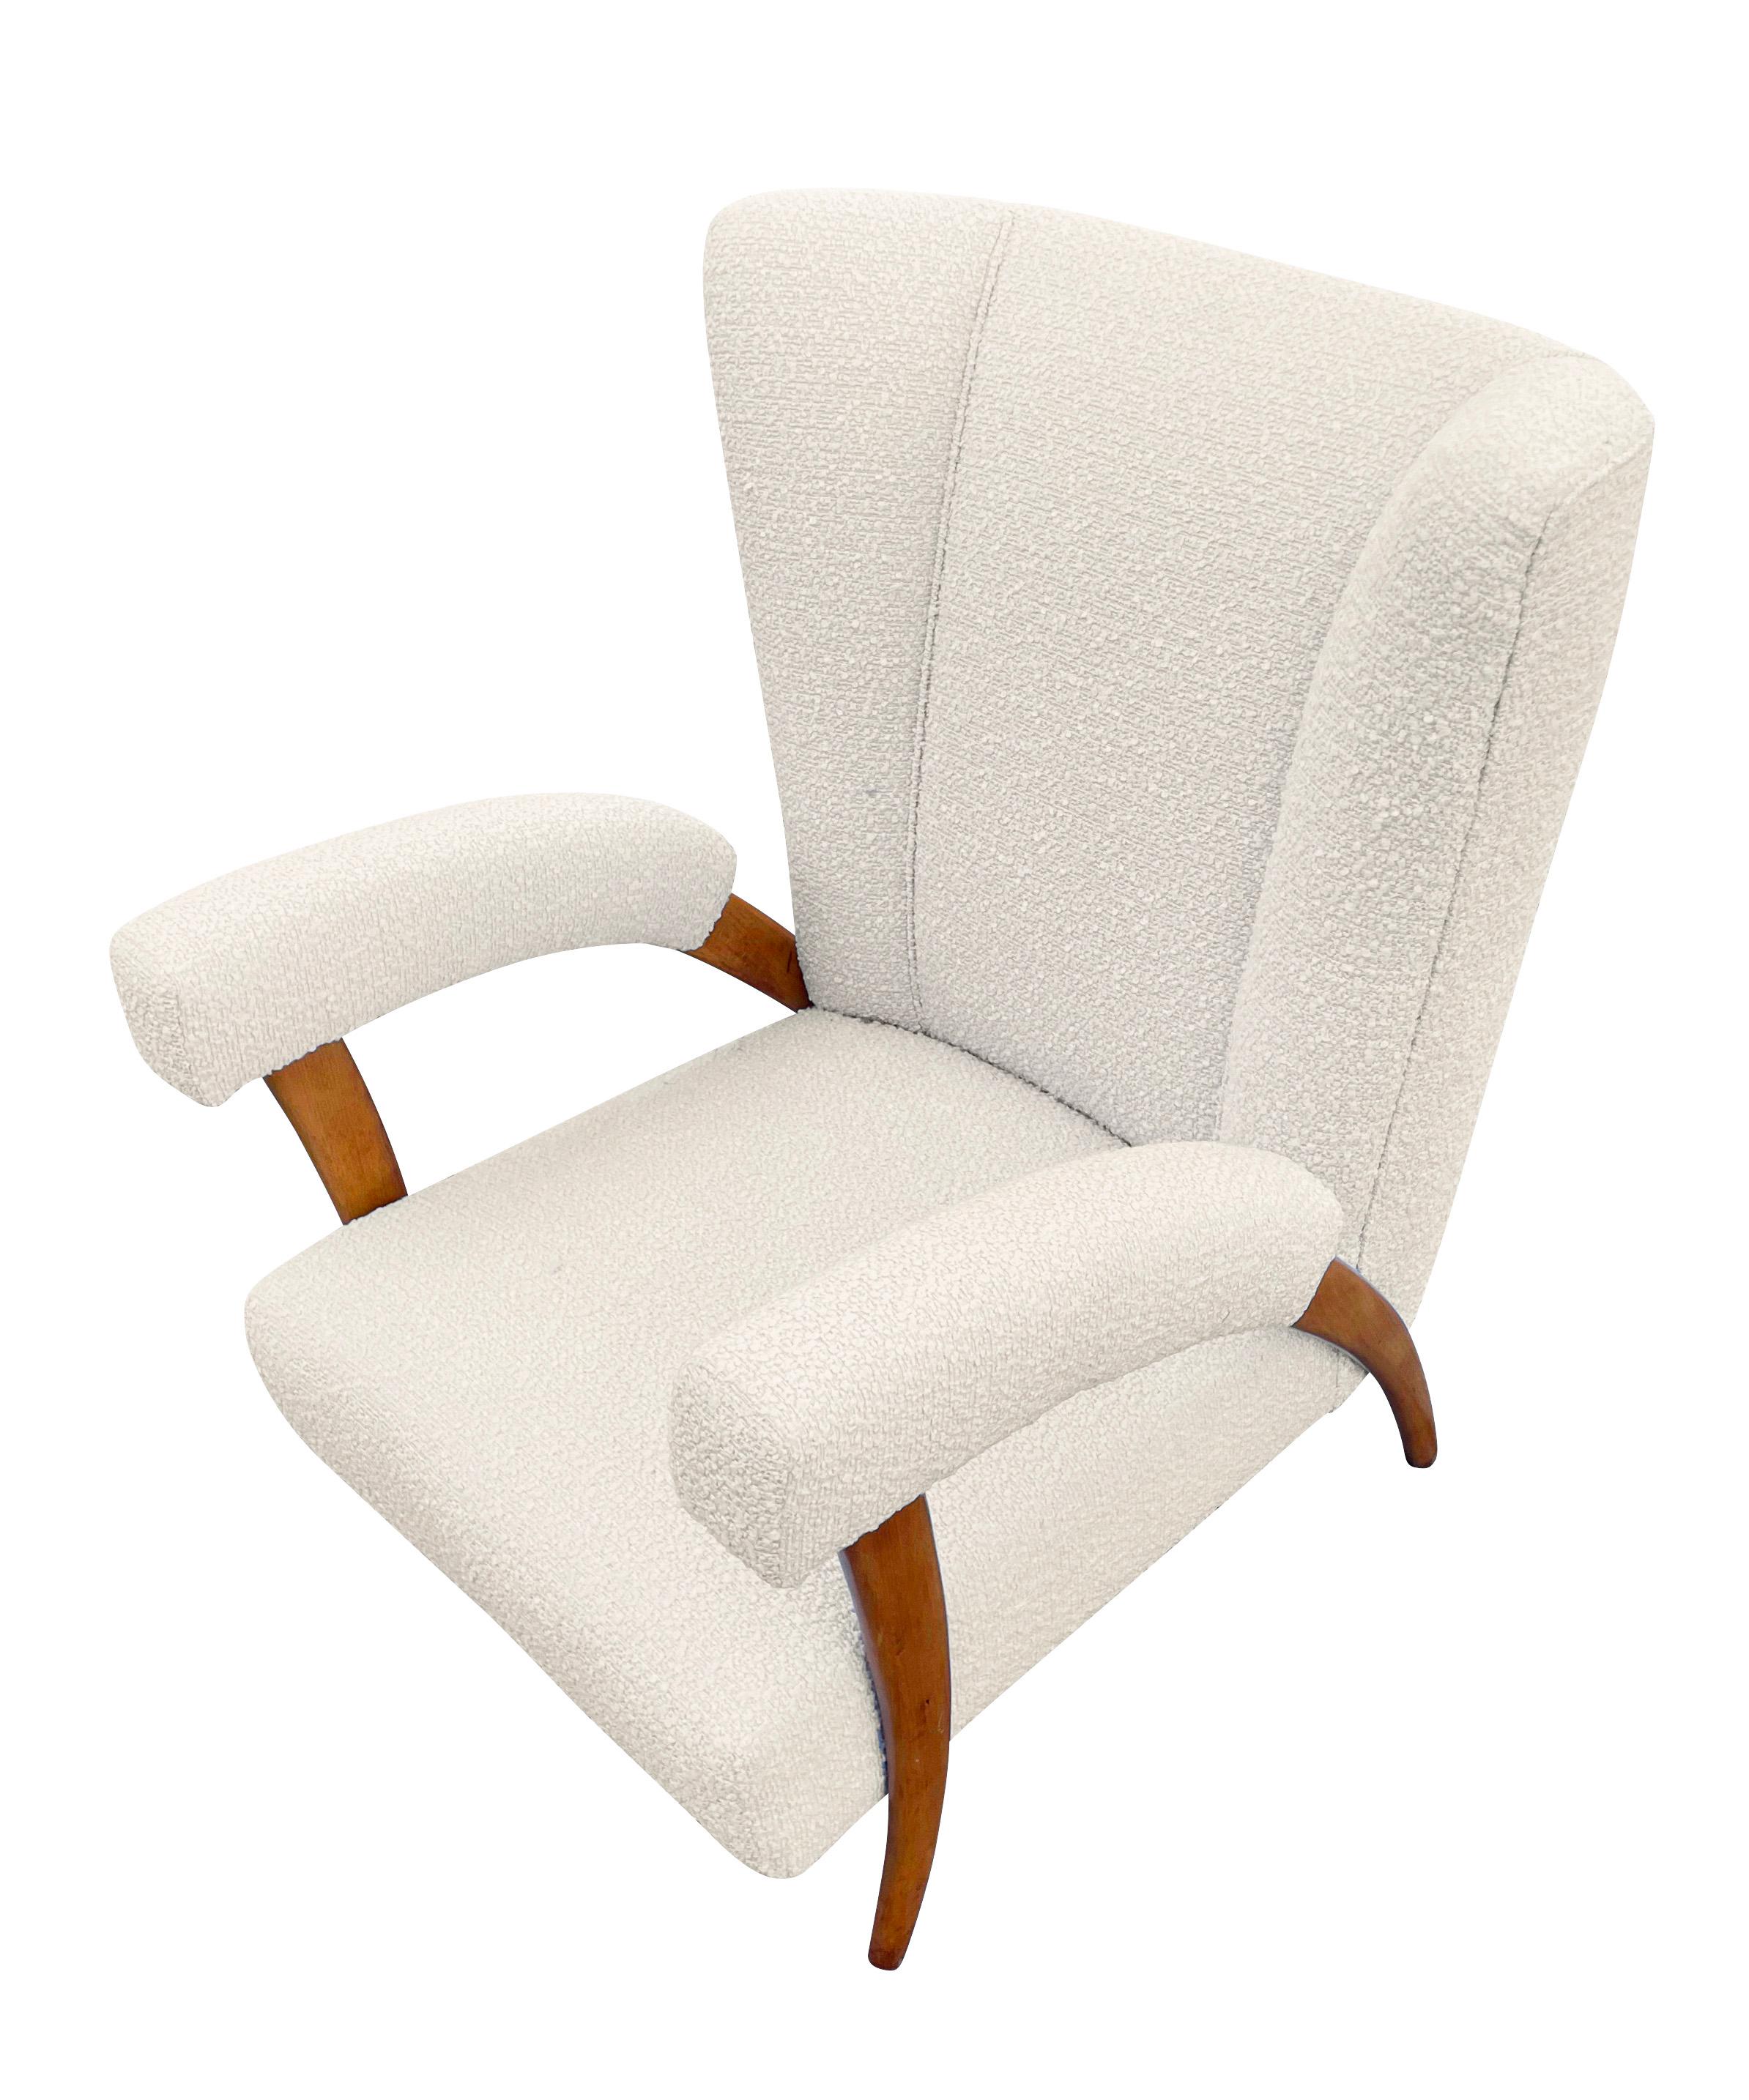 Pair of armchairs attributed to Paolo Buffa, Italy, 1950s.
$9,900.00.
Pair of beautiful 1950s Paolo Buffa lounge chairs with “tusk” shaped legs. Upholstered in an off-white boucle fabric.

Condition: Minor wear consistent with age and use.